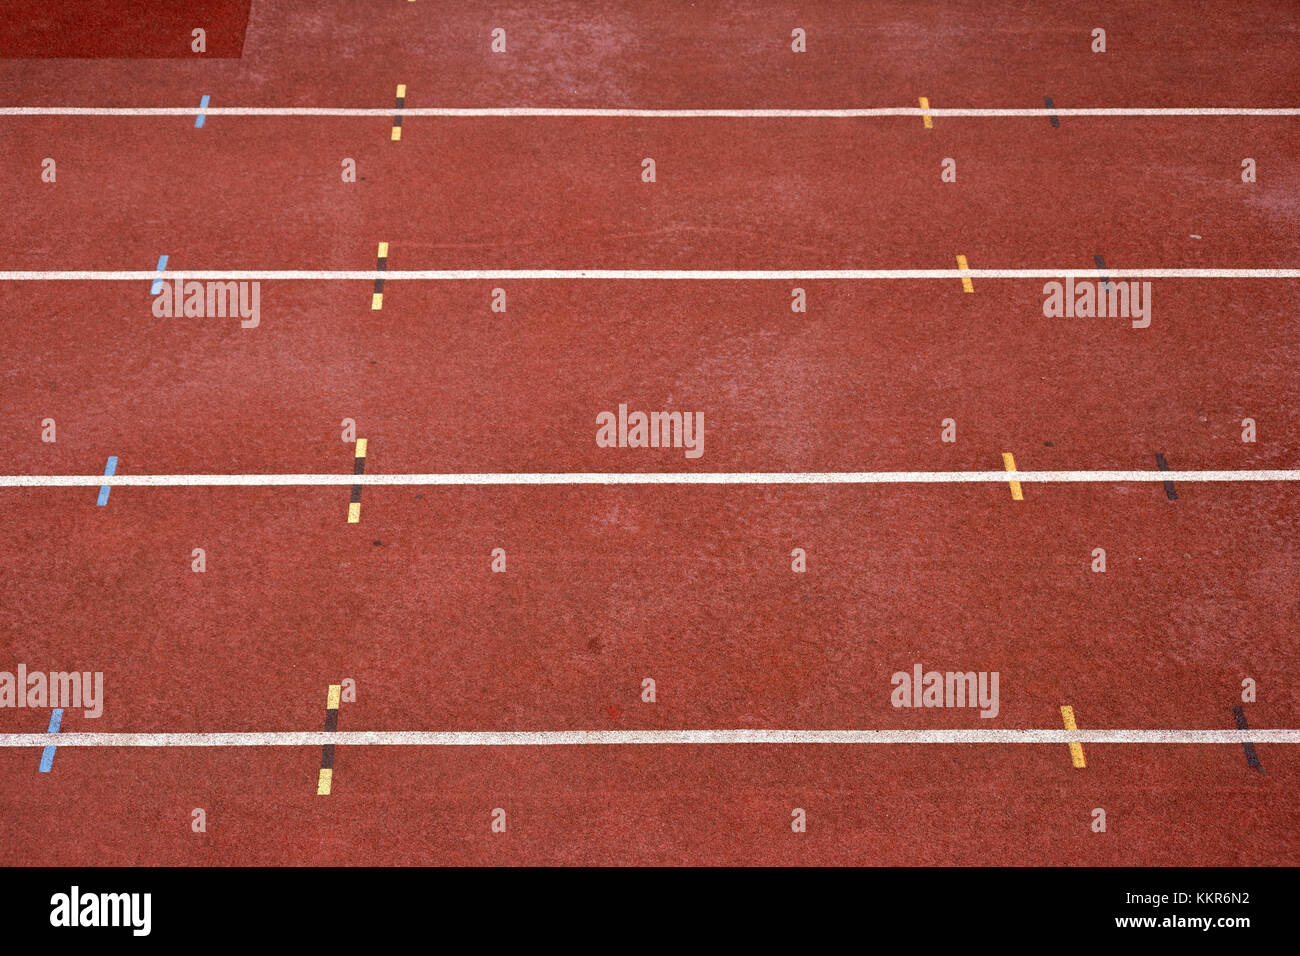 close-up and diagonal perspective to 100 m track in a stadium with markings. Stock Photo